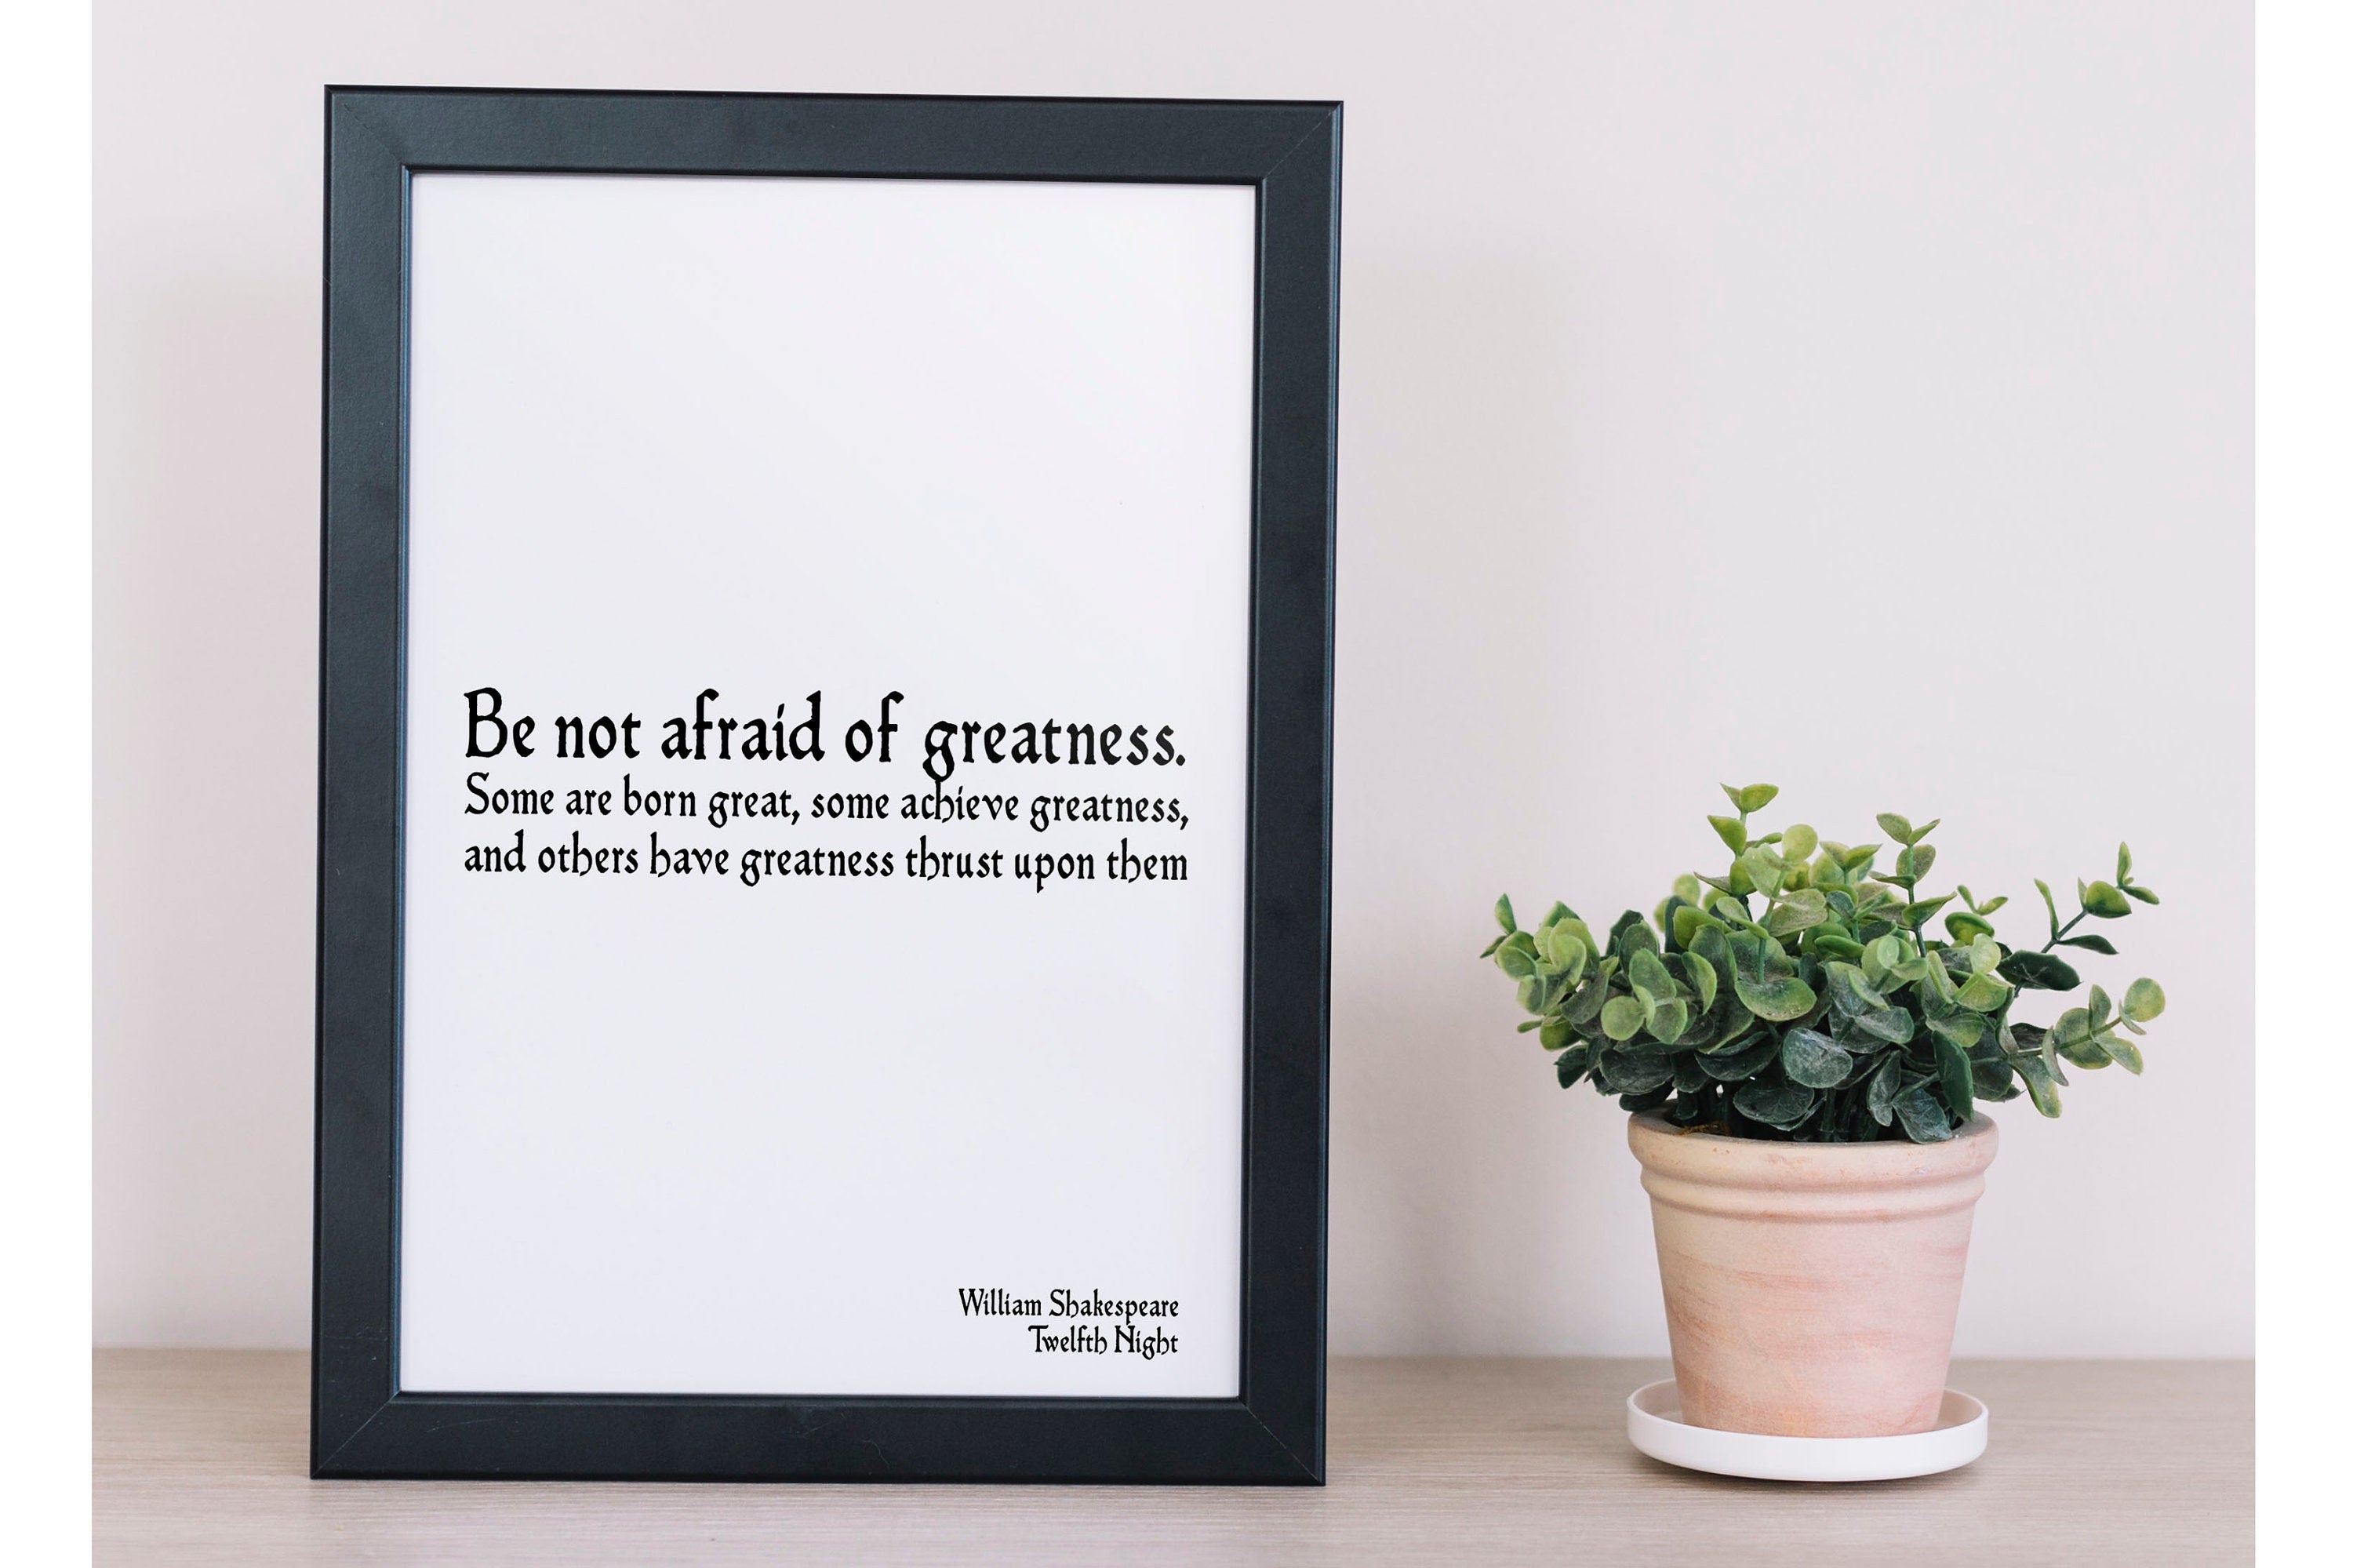 Be Not Afraid Of Greatness William Shakespeare Unframed and Framed Wall Art Prints in Black & White, Twelfth Night